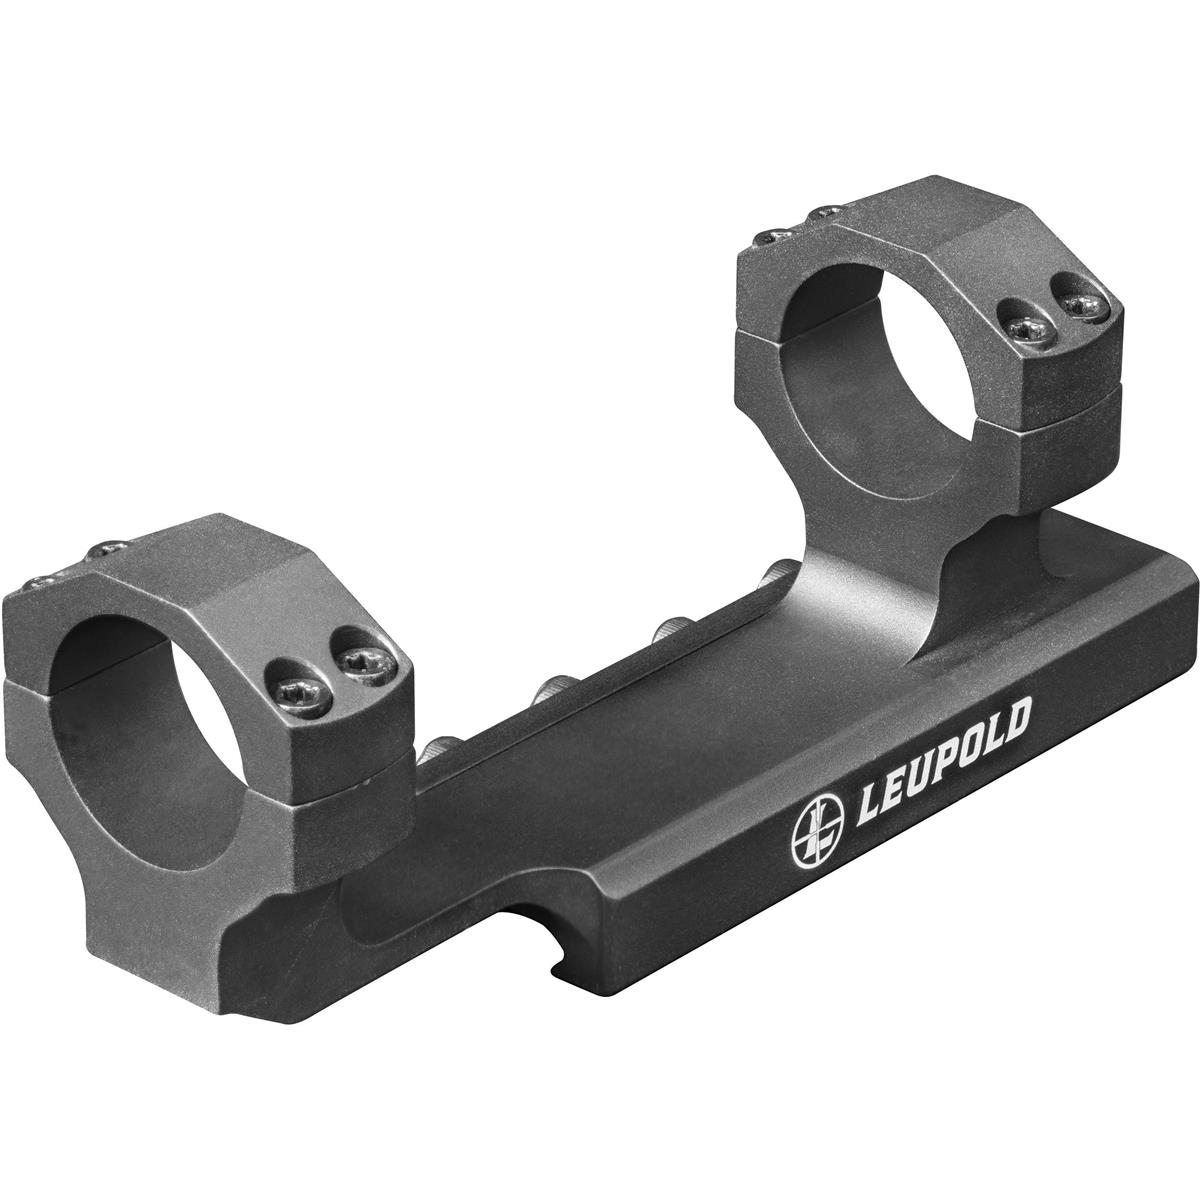 

Leupold MarkAR Integral Scope Mounting System with 1" Rings, Matte Black